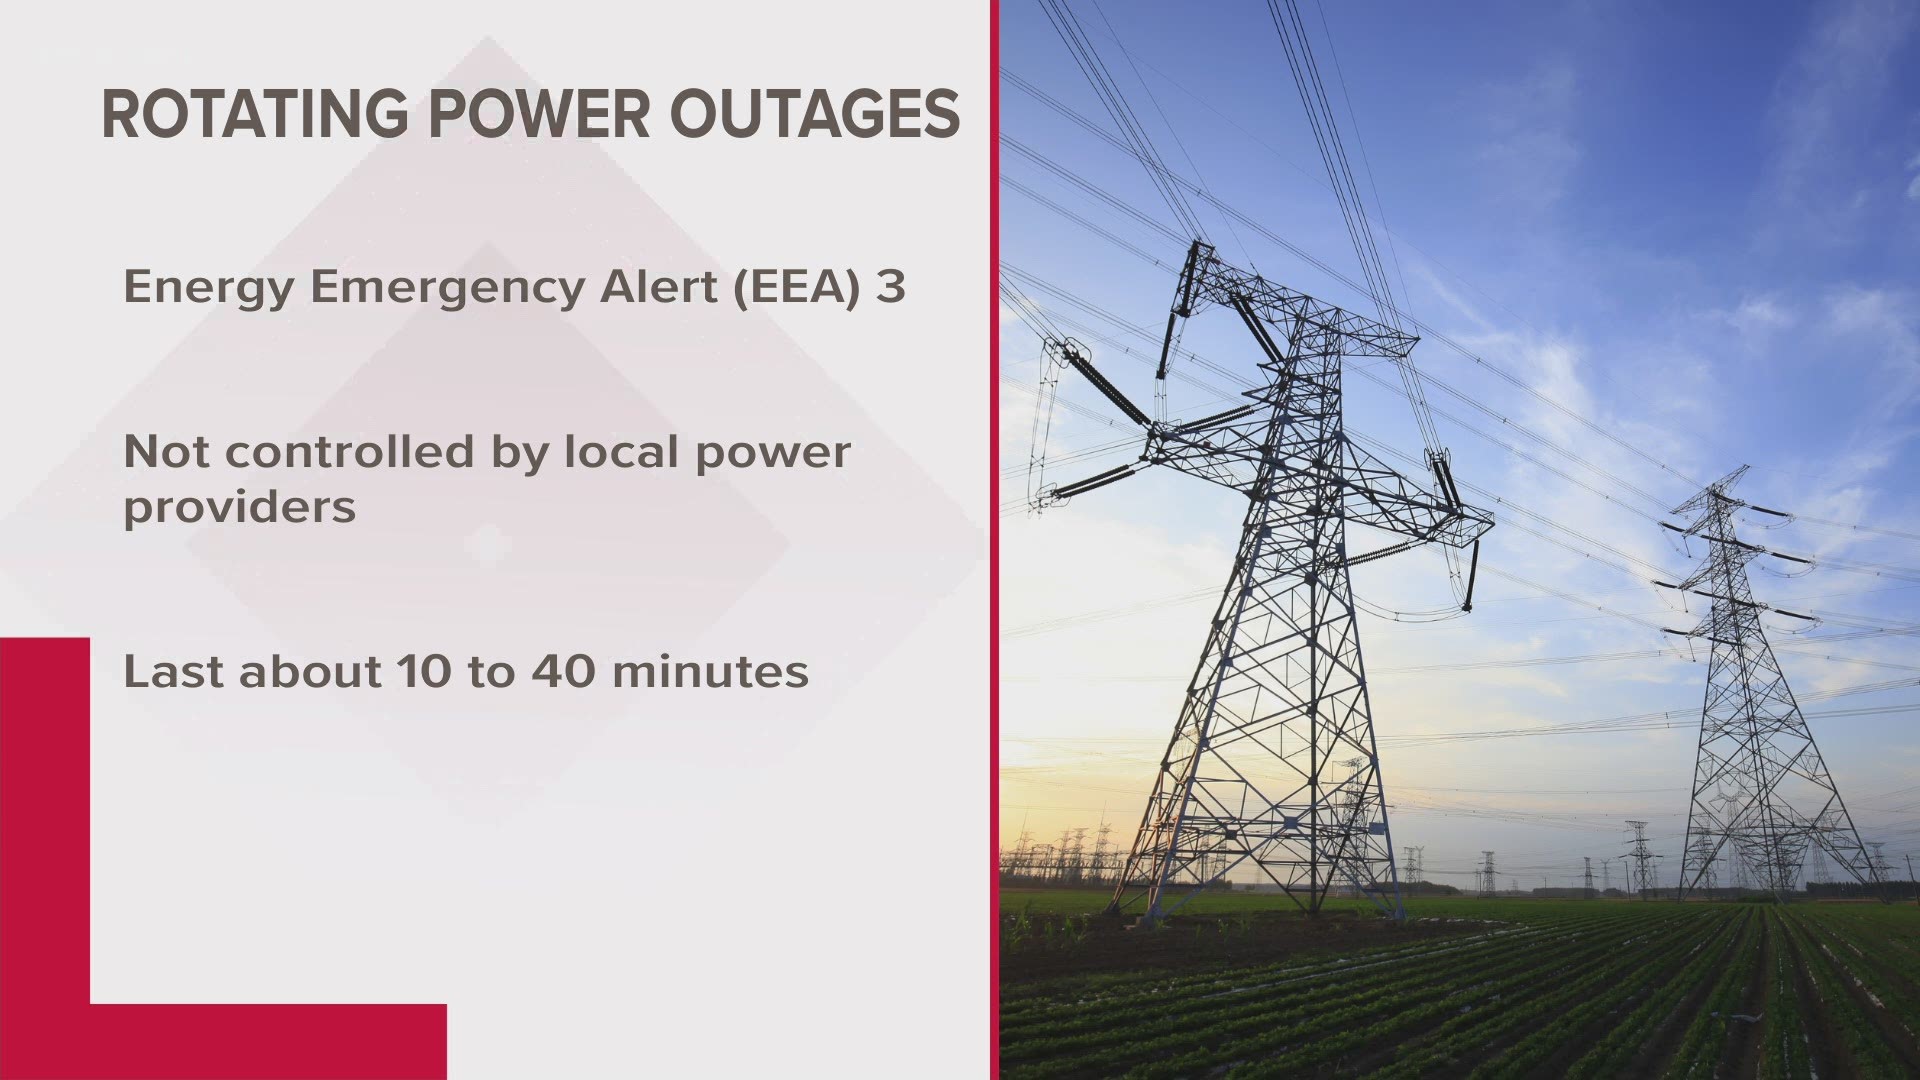 Austin and the state are operating rolling power outages to deal with the demand for power.